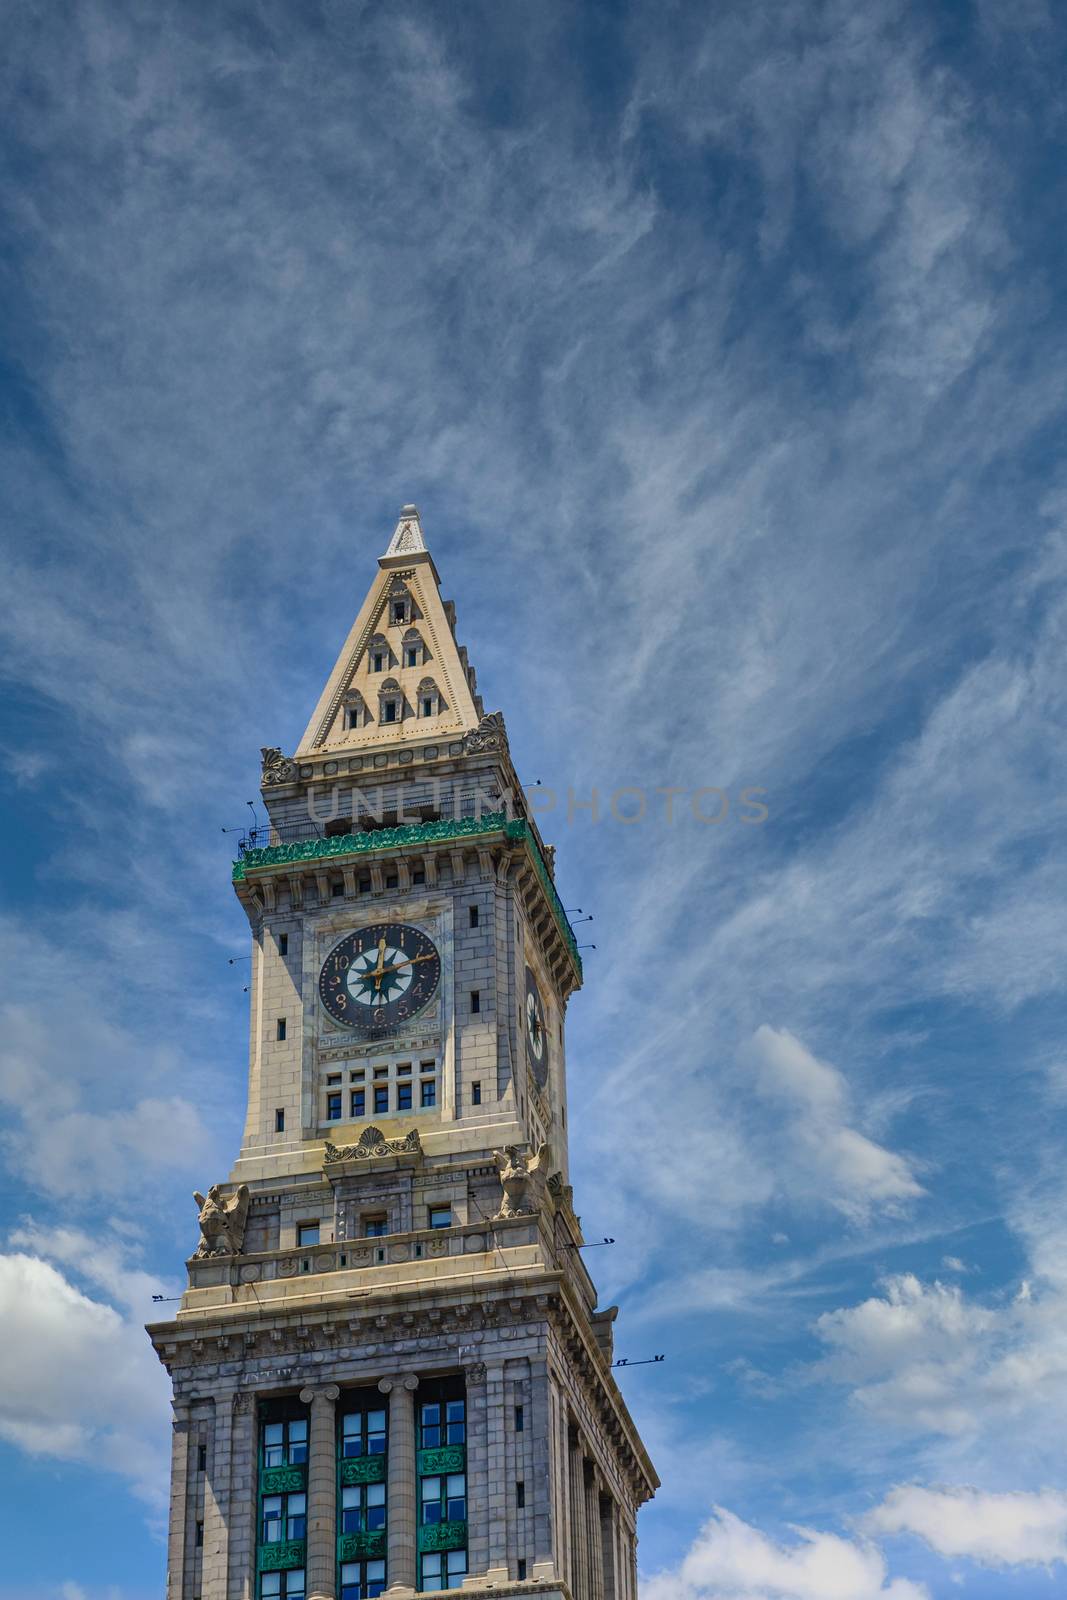 Old Clock Tower in Boston Sky by dbvirago